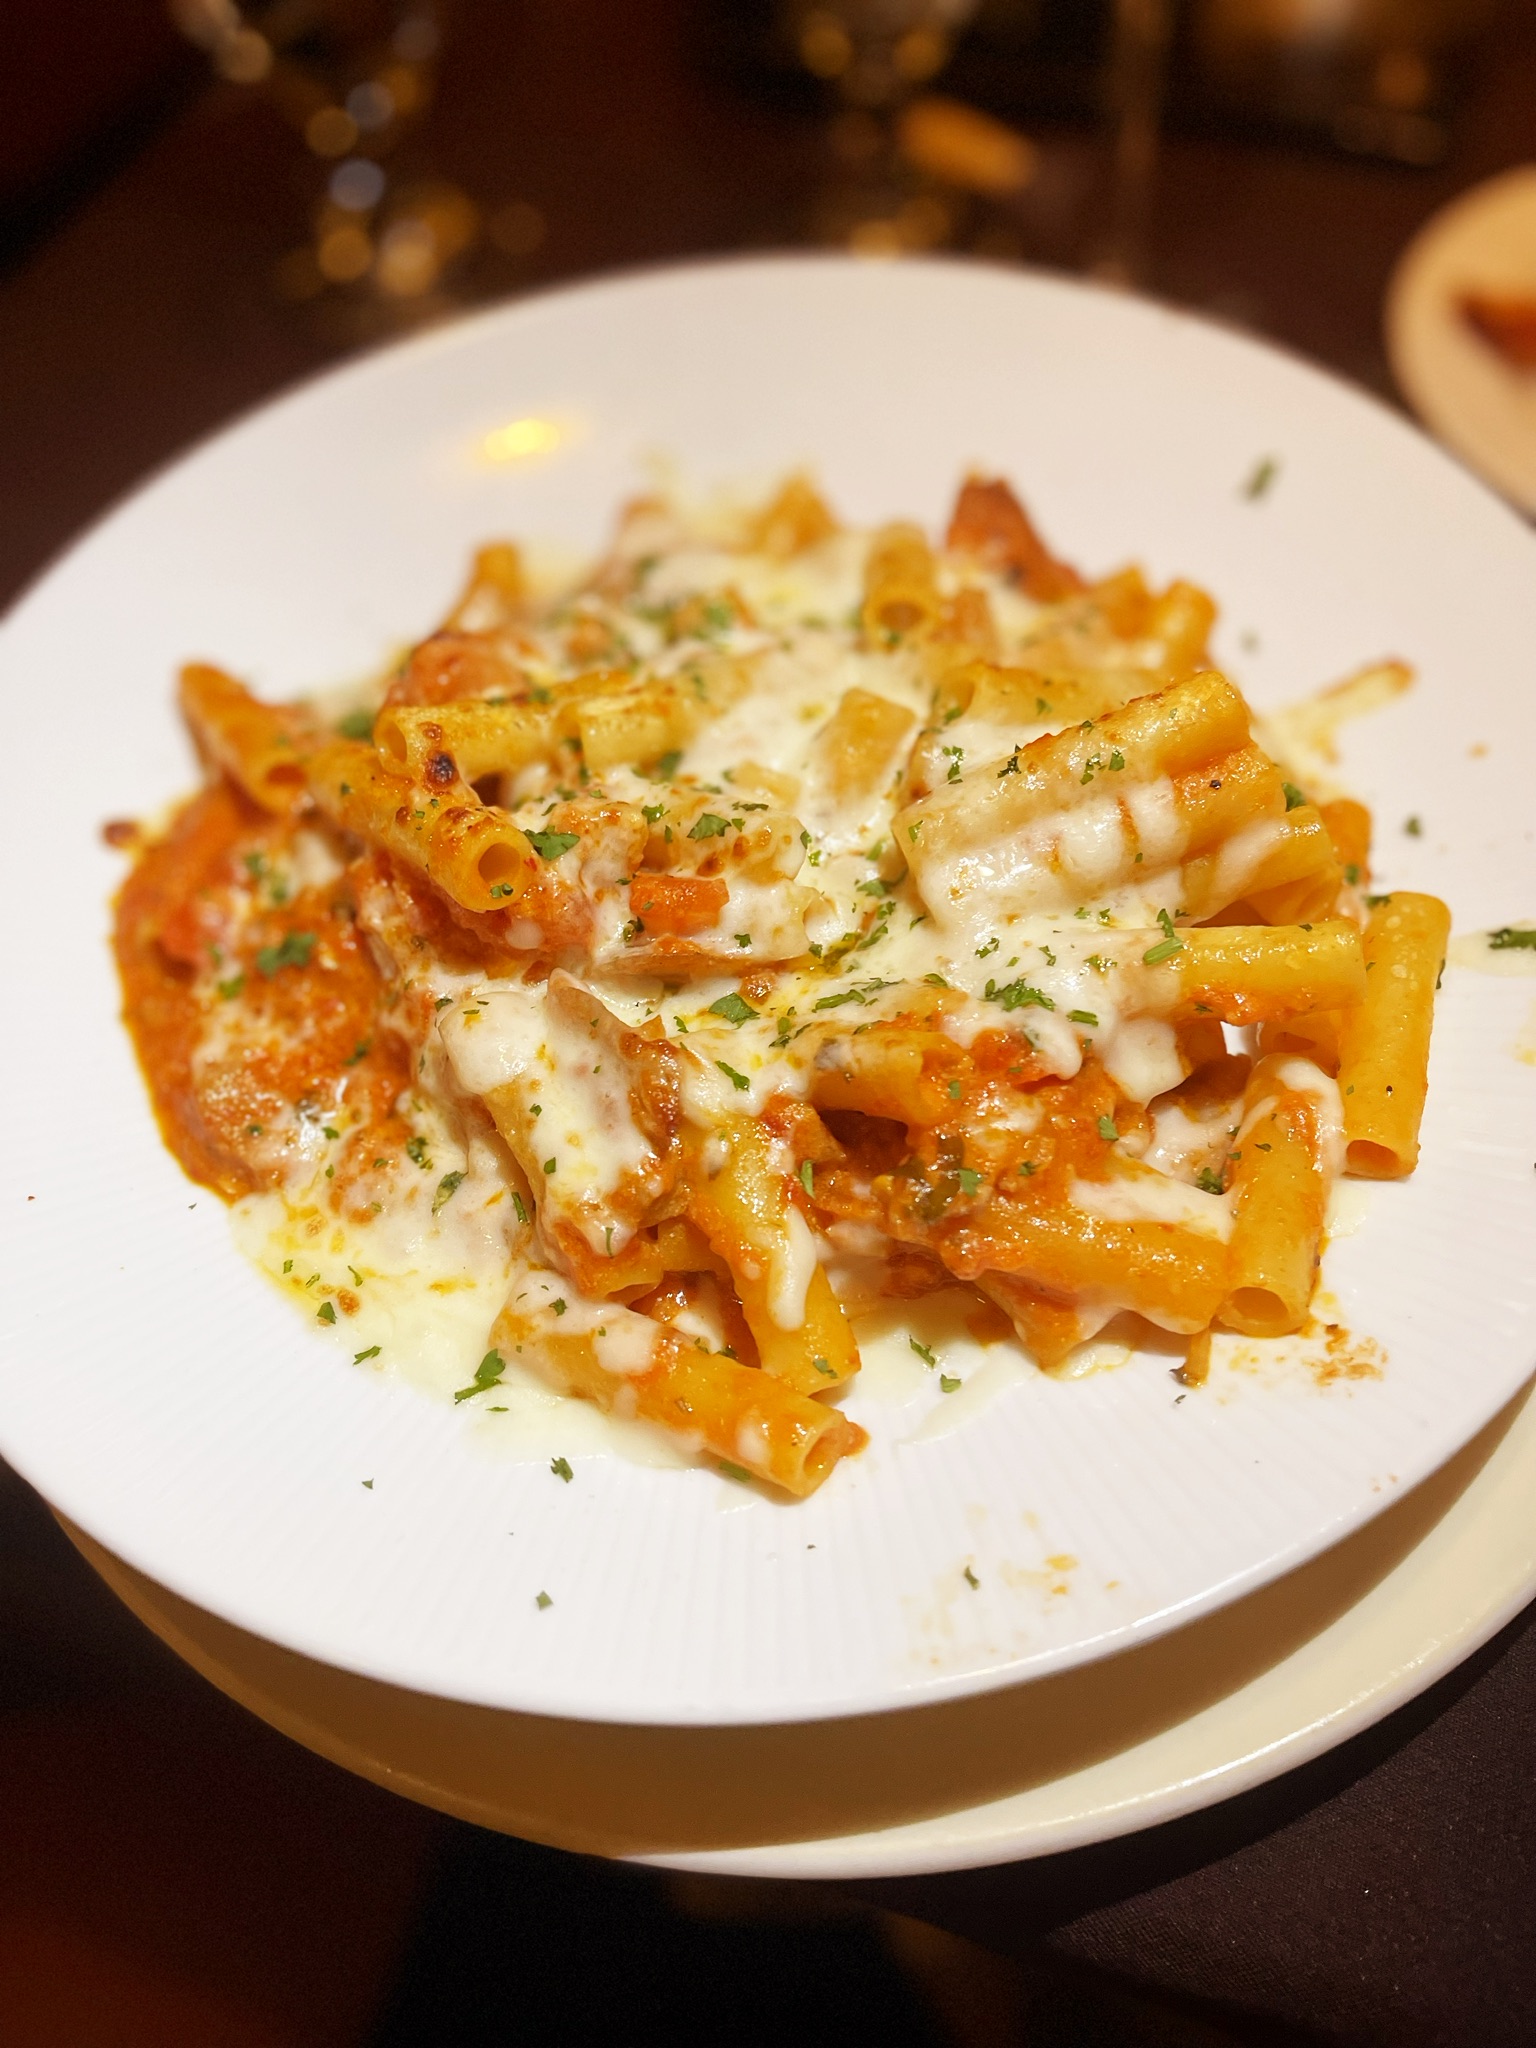 A plate of pasta with cheese and sauce Description automatically generated with medium confidence